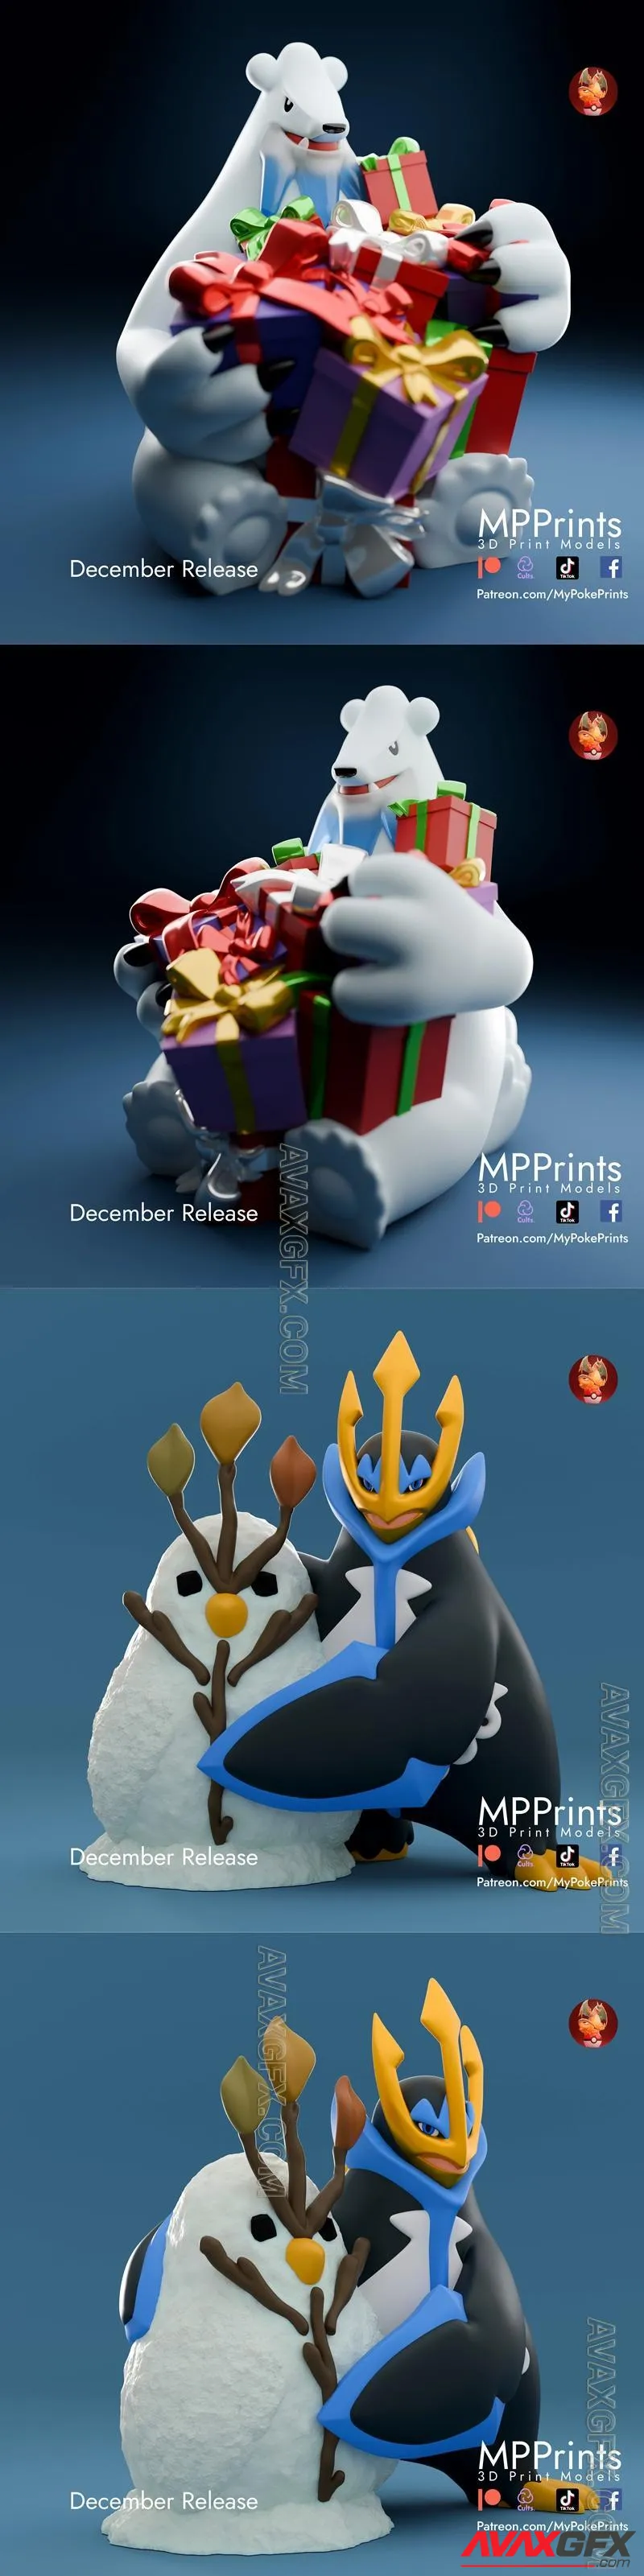 Beartic and presents and Empoleon and snowman - STL 3D Model